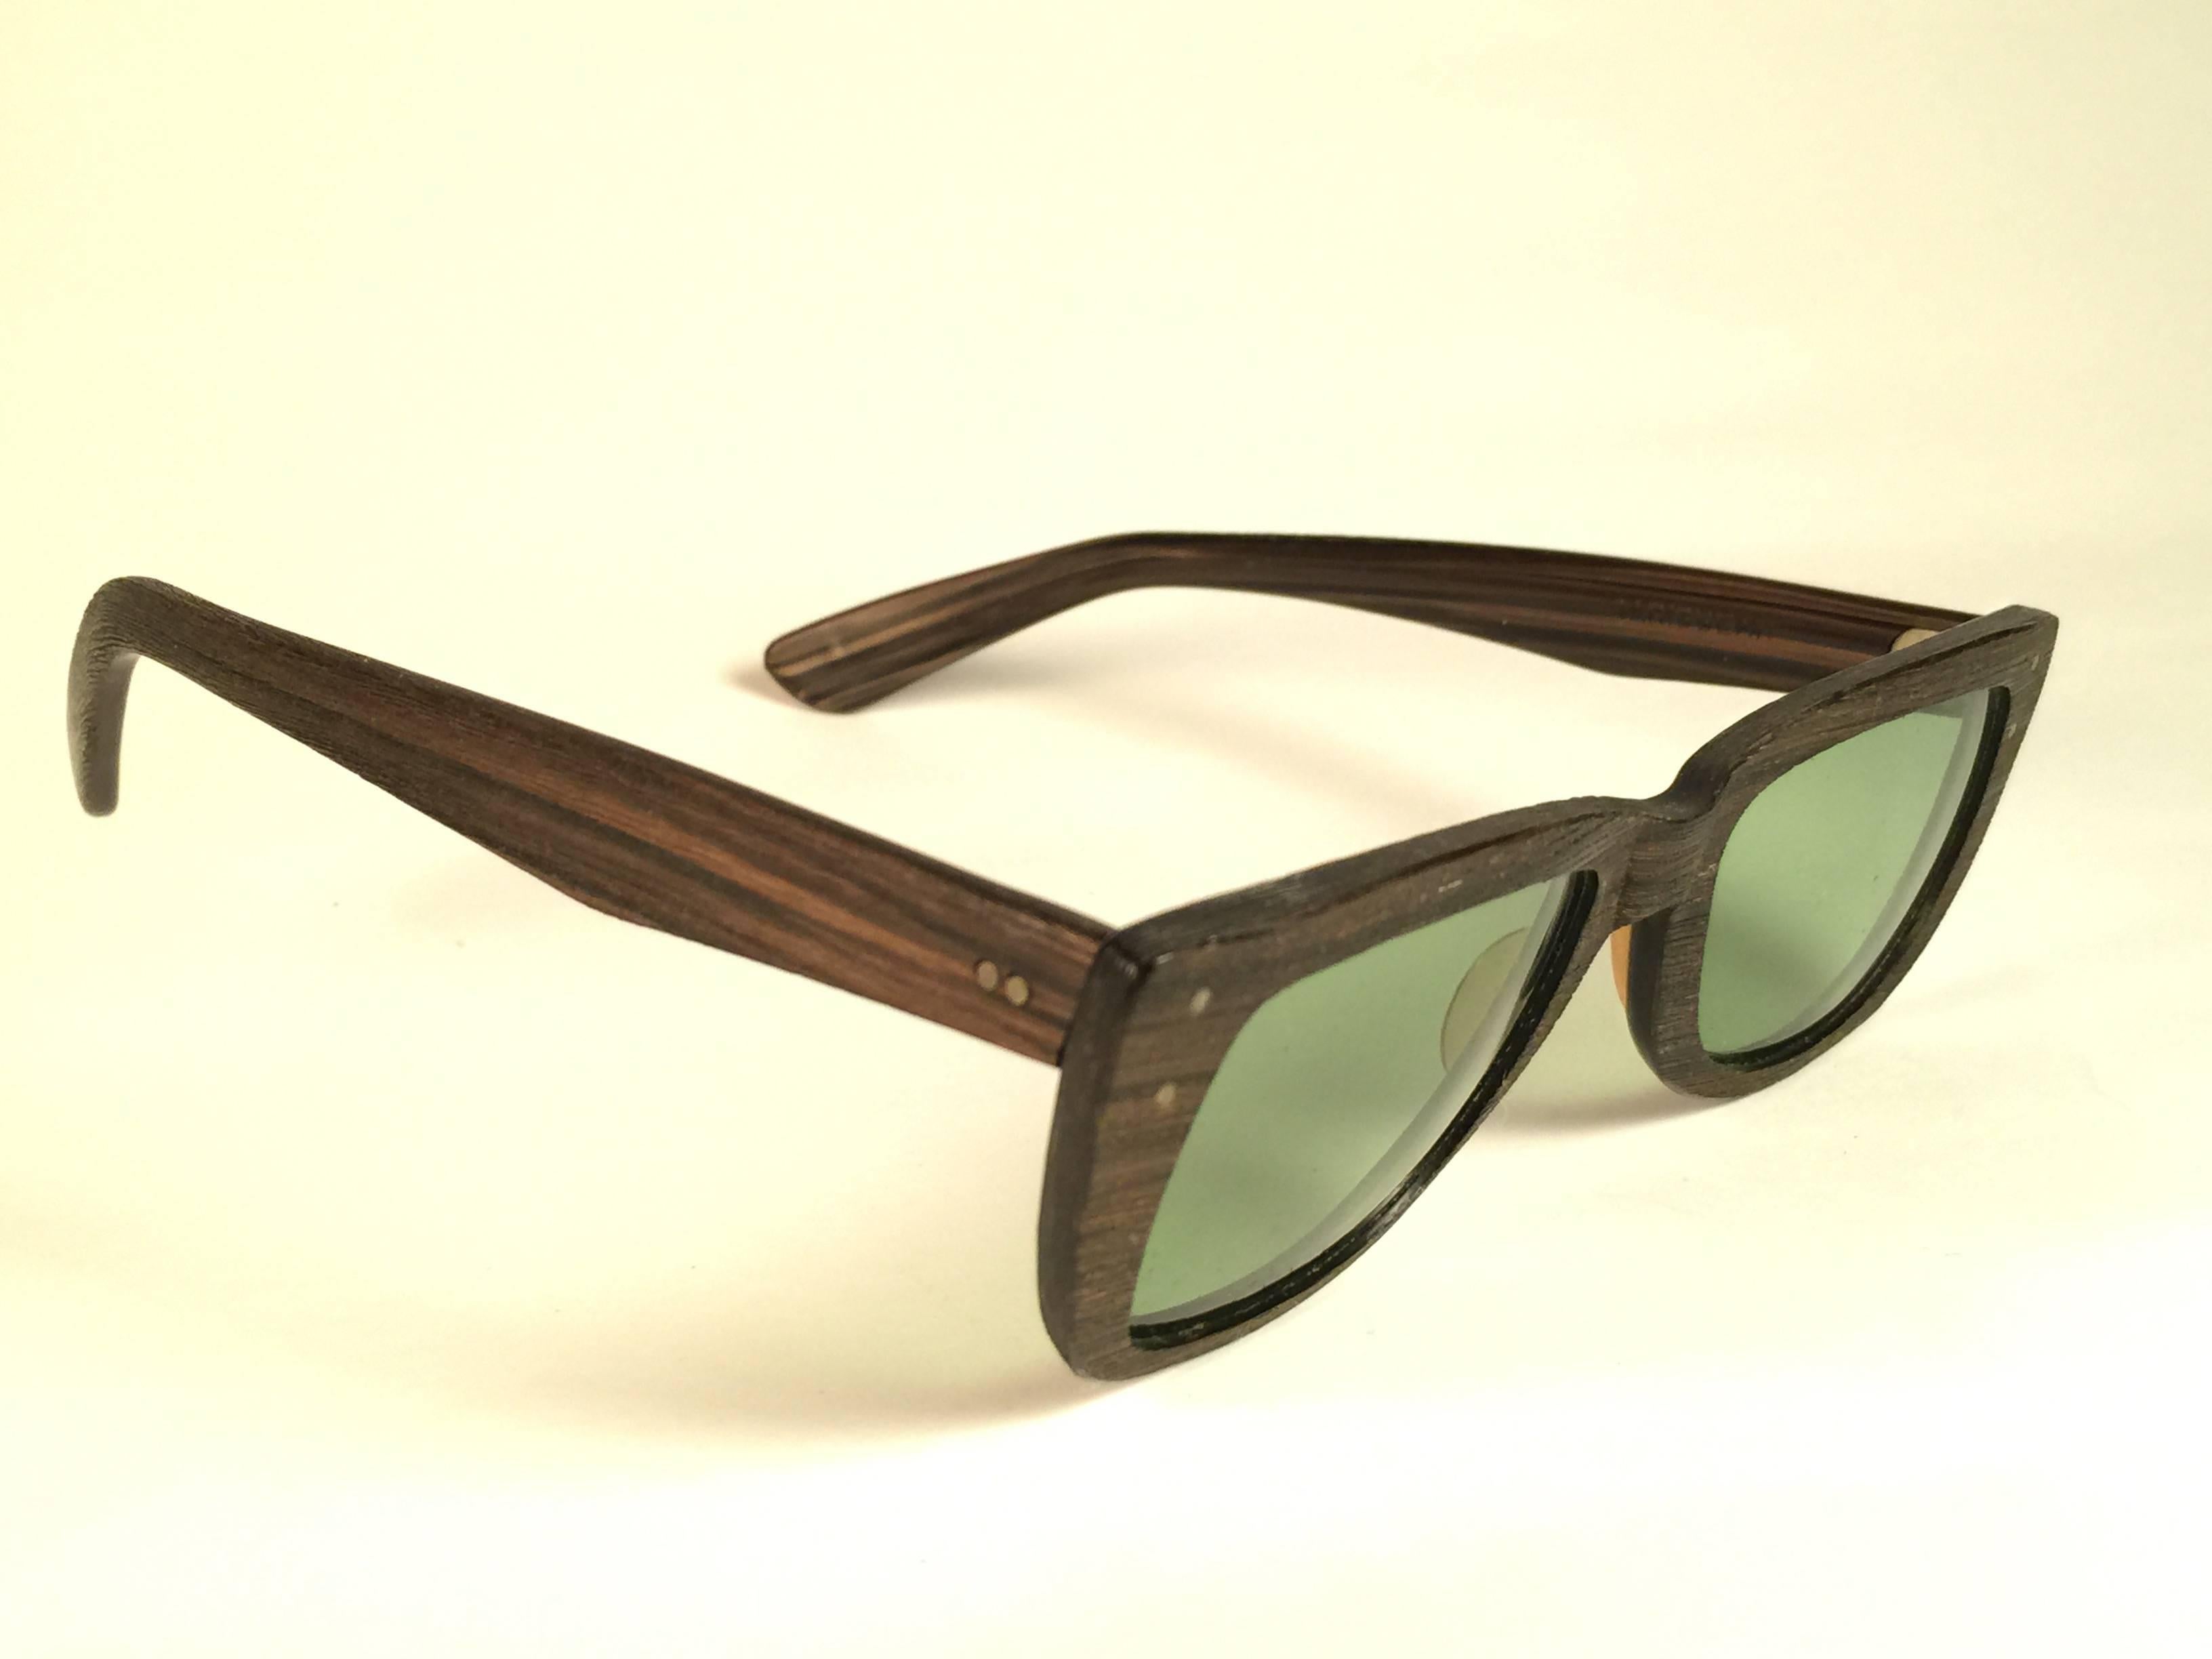 Super Rare 1960's Caribbean in dark wood with thinner and elongated temples .  
Bausch and Lomb USA Made. RB3 Green lenses. Straight out of the 1960's. All hallmarks. Minor sign of wear due to 60 years of storage. A Piece of sunglasses history.